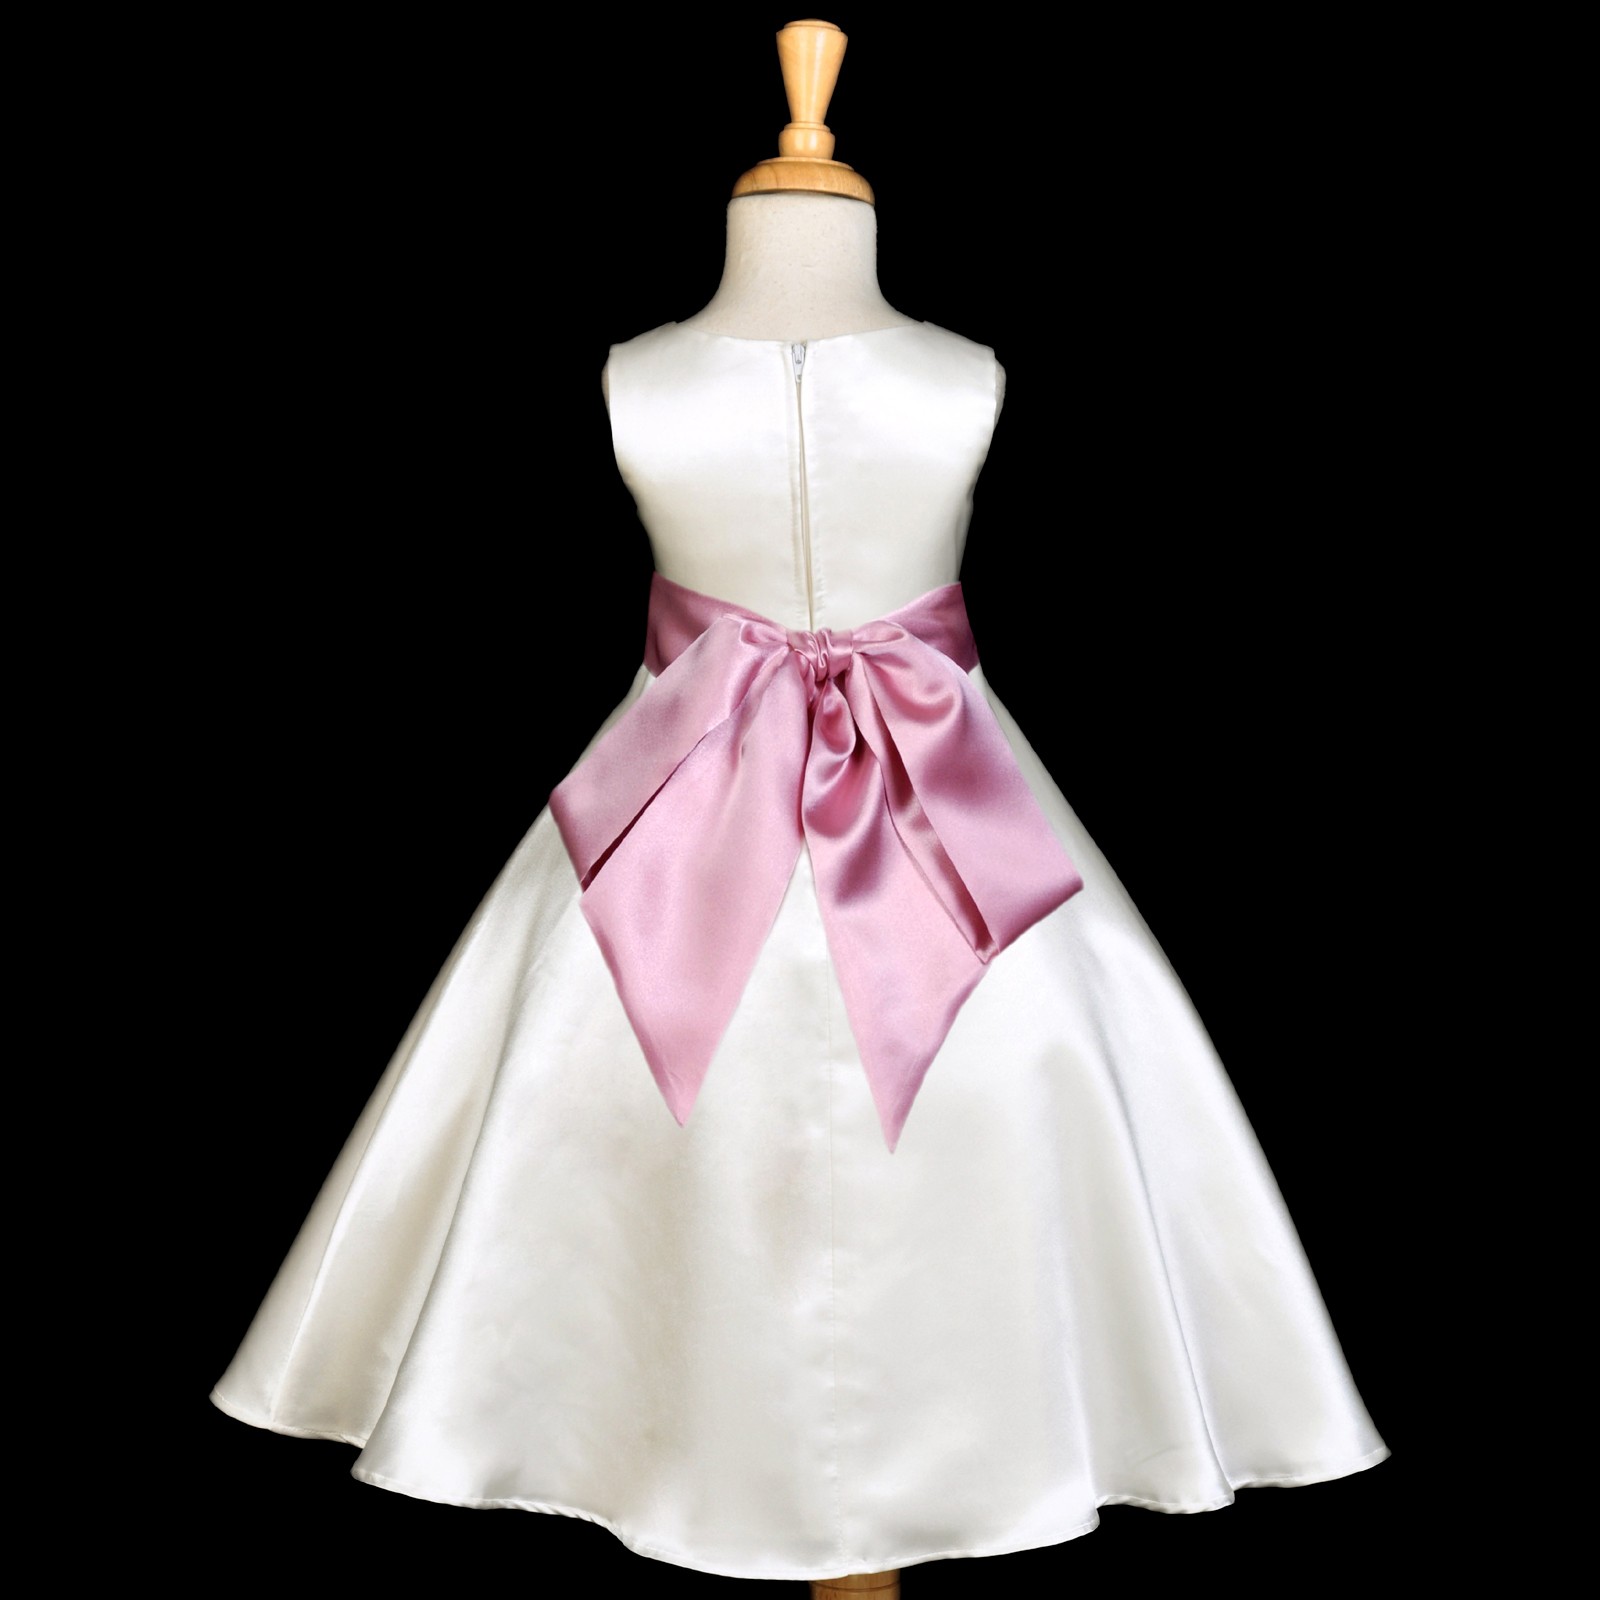 Ivory/Dusty Rose A-Line Satin Flower Girl Dress Pageant Reception 821S